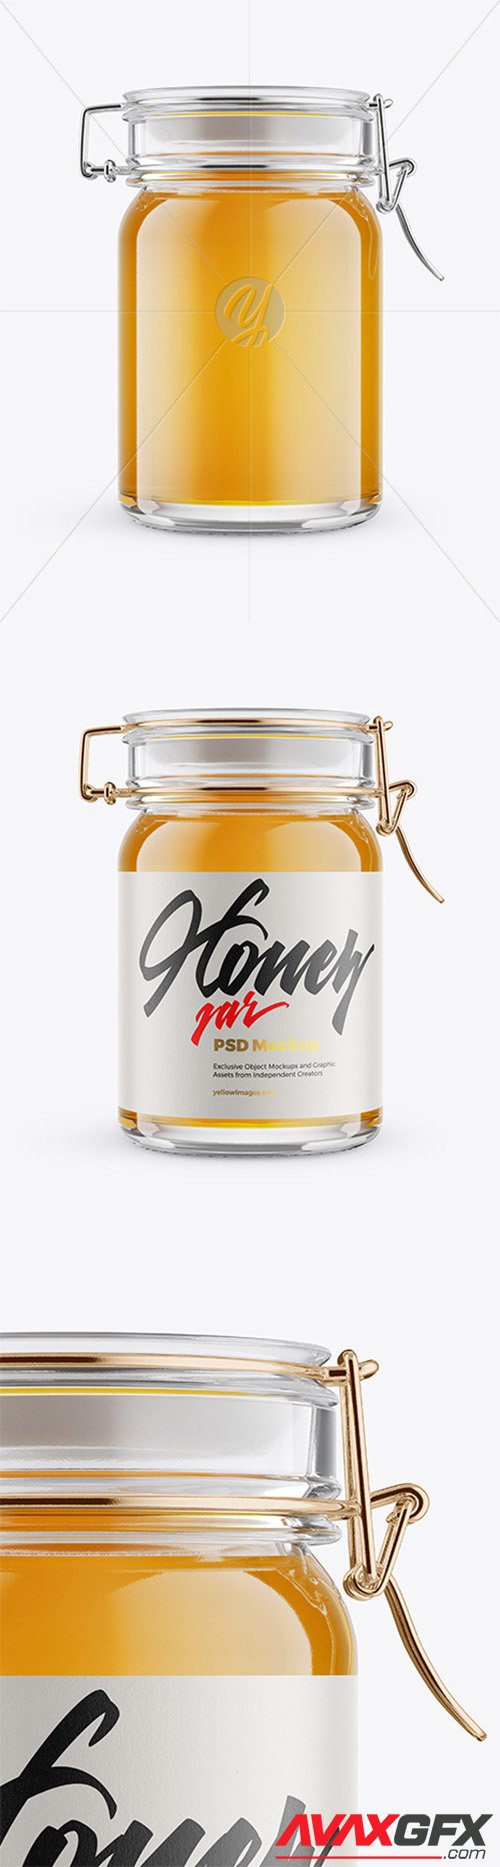 Download Glass Honey Jar With Clamp Lid Mockup 62655 » AVAXGFX ...